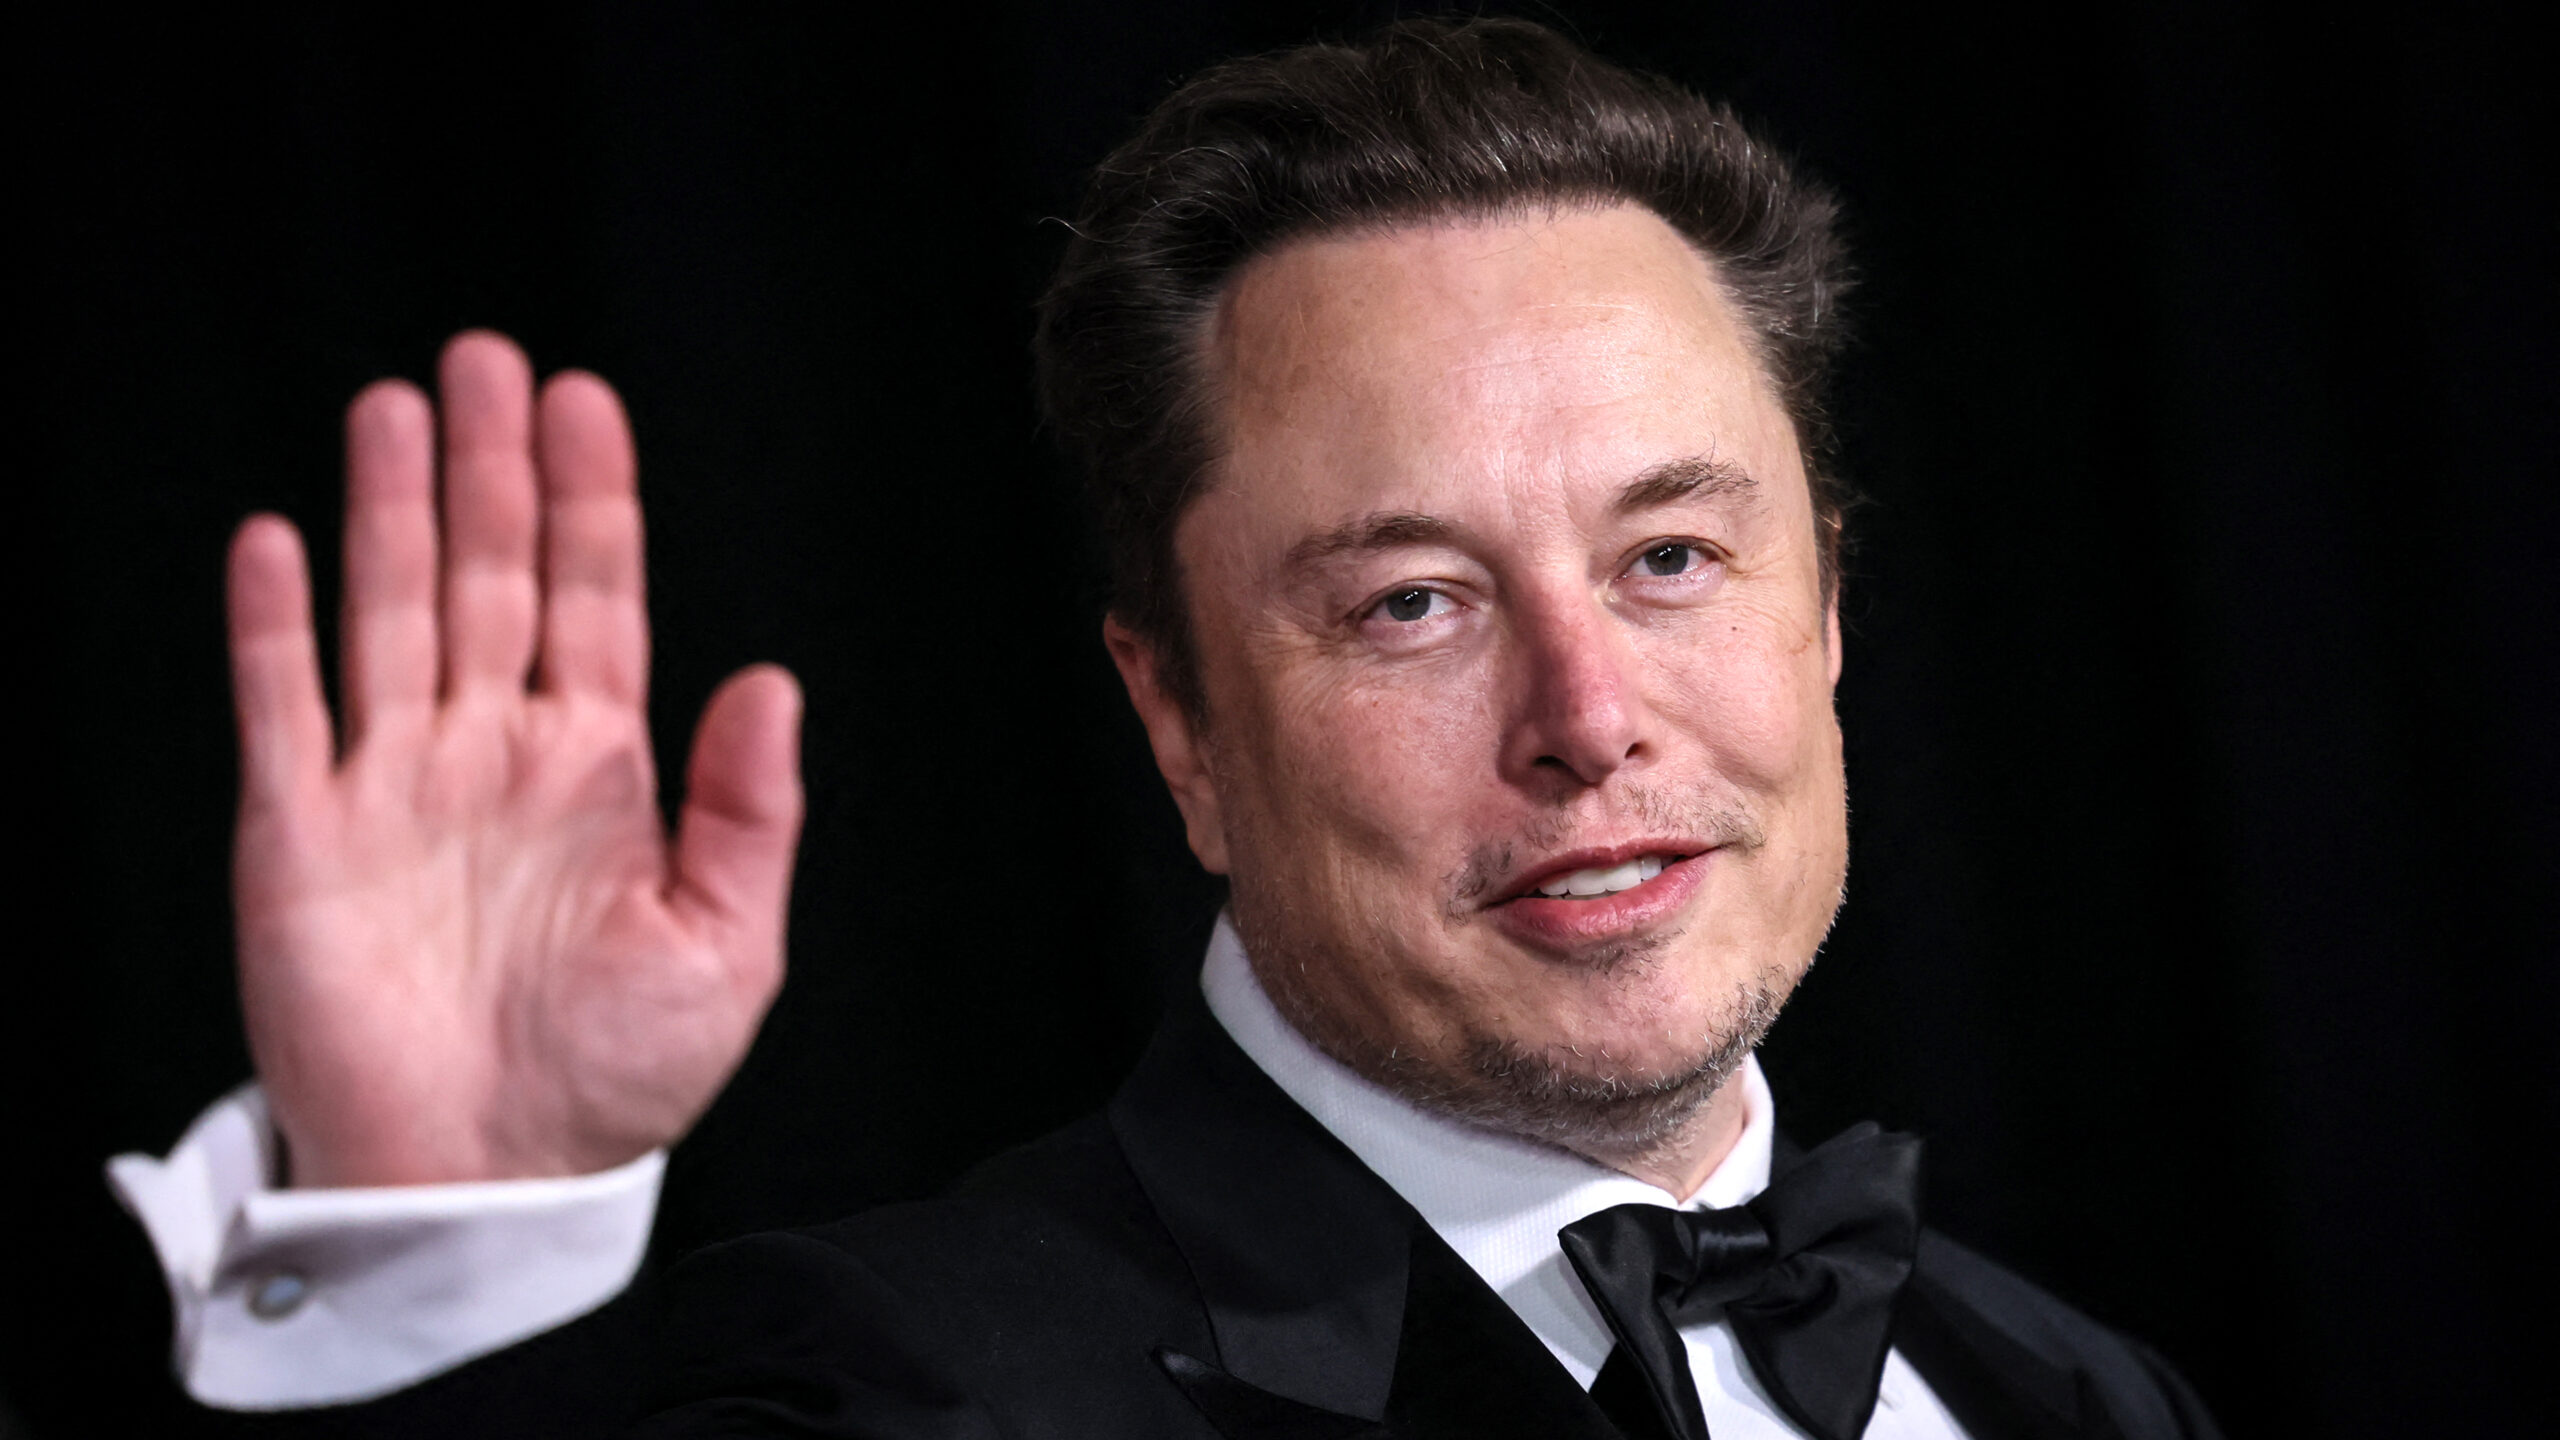 Elon Musk Warns ‘The Entire Left’ Will Soon Be Anti-Semitic